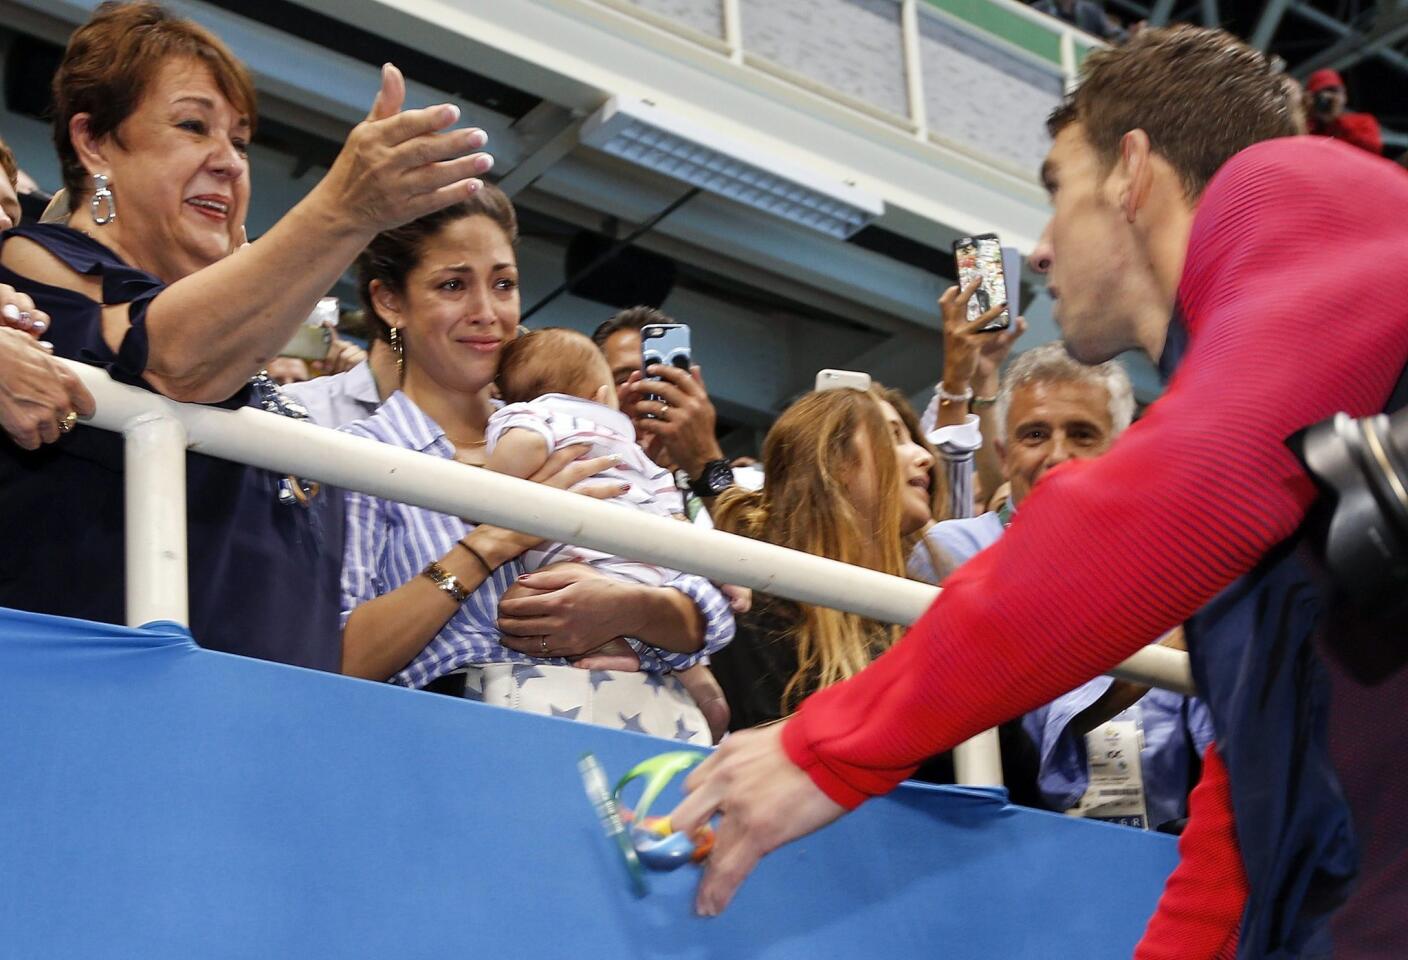 Michael Phelps of USA (R) goes to see his mother Deborah (L), his fiancee Nicole Johnson (C) and their son Boomer during the round of honour after the medal ceremony for the men's 200m Butterfly final race of the Rio 2016 Olympic Games Swimming events at Olympic Aquatics Stadium at the Olympic Park in Rio de Janeiro, Brazil.